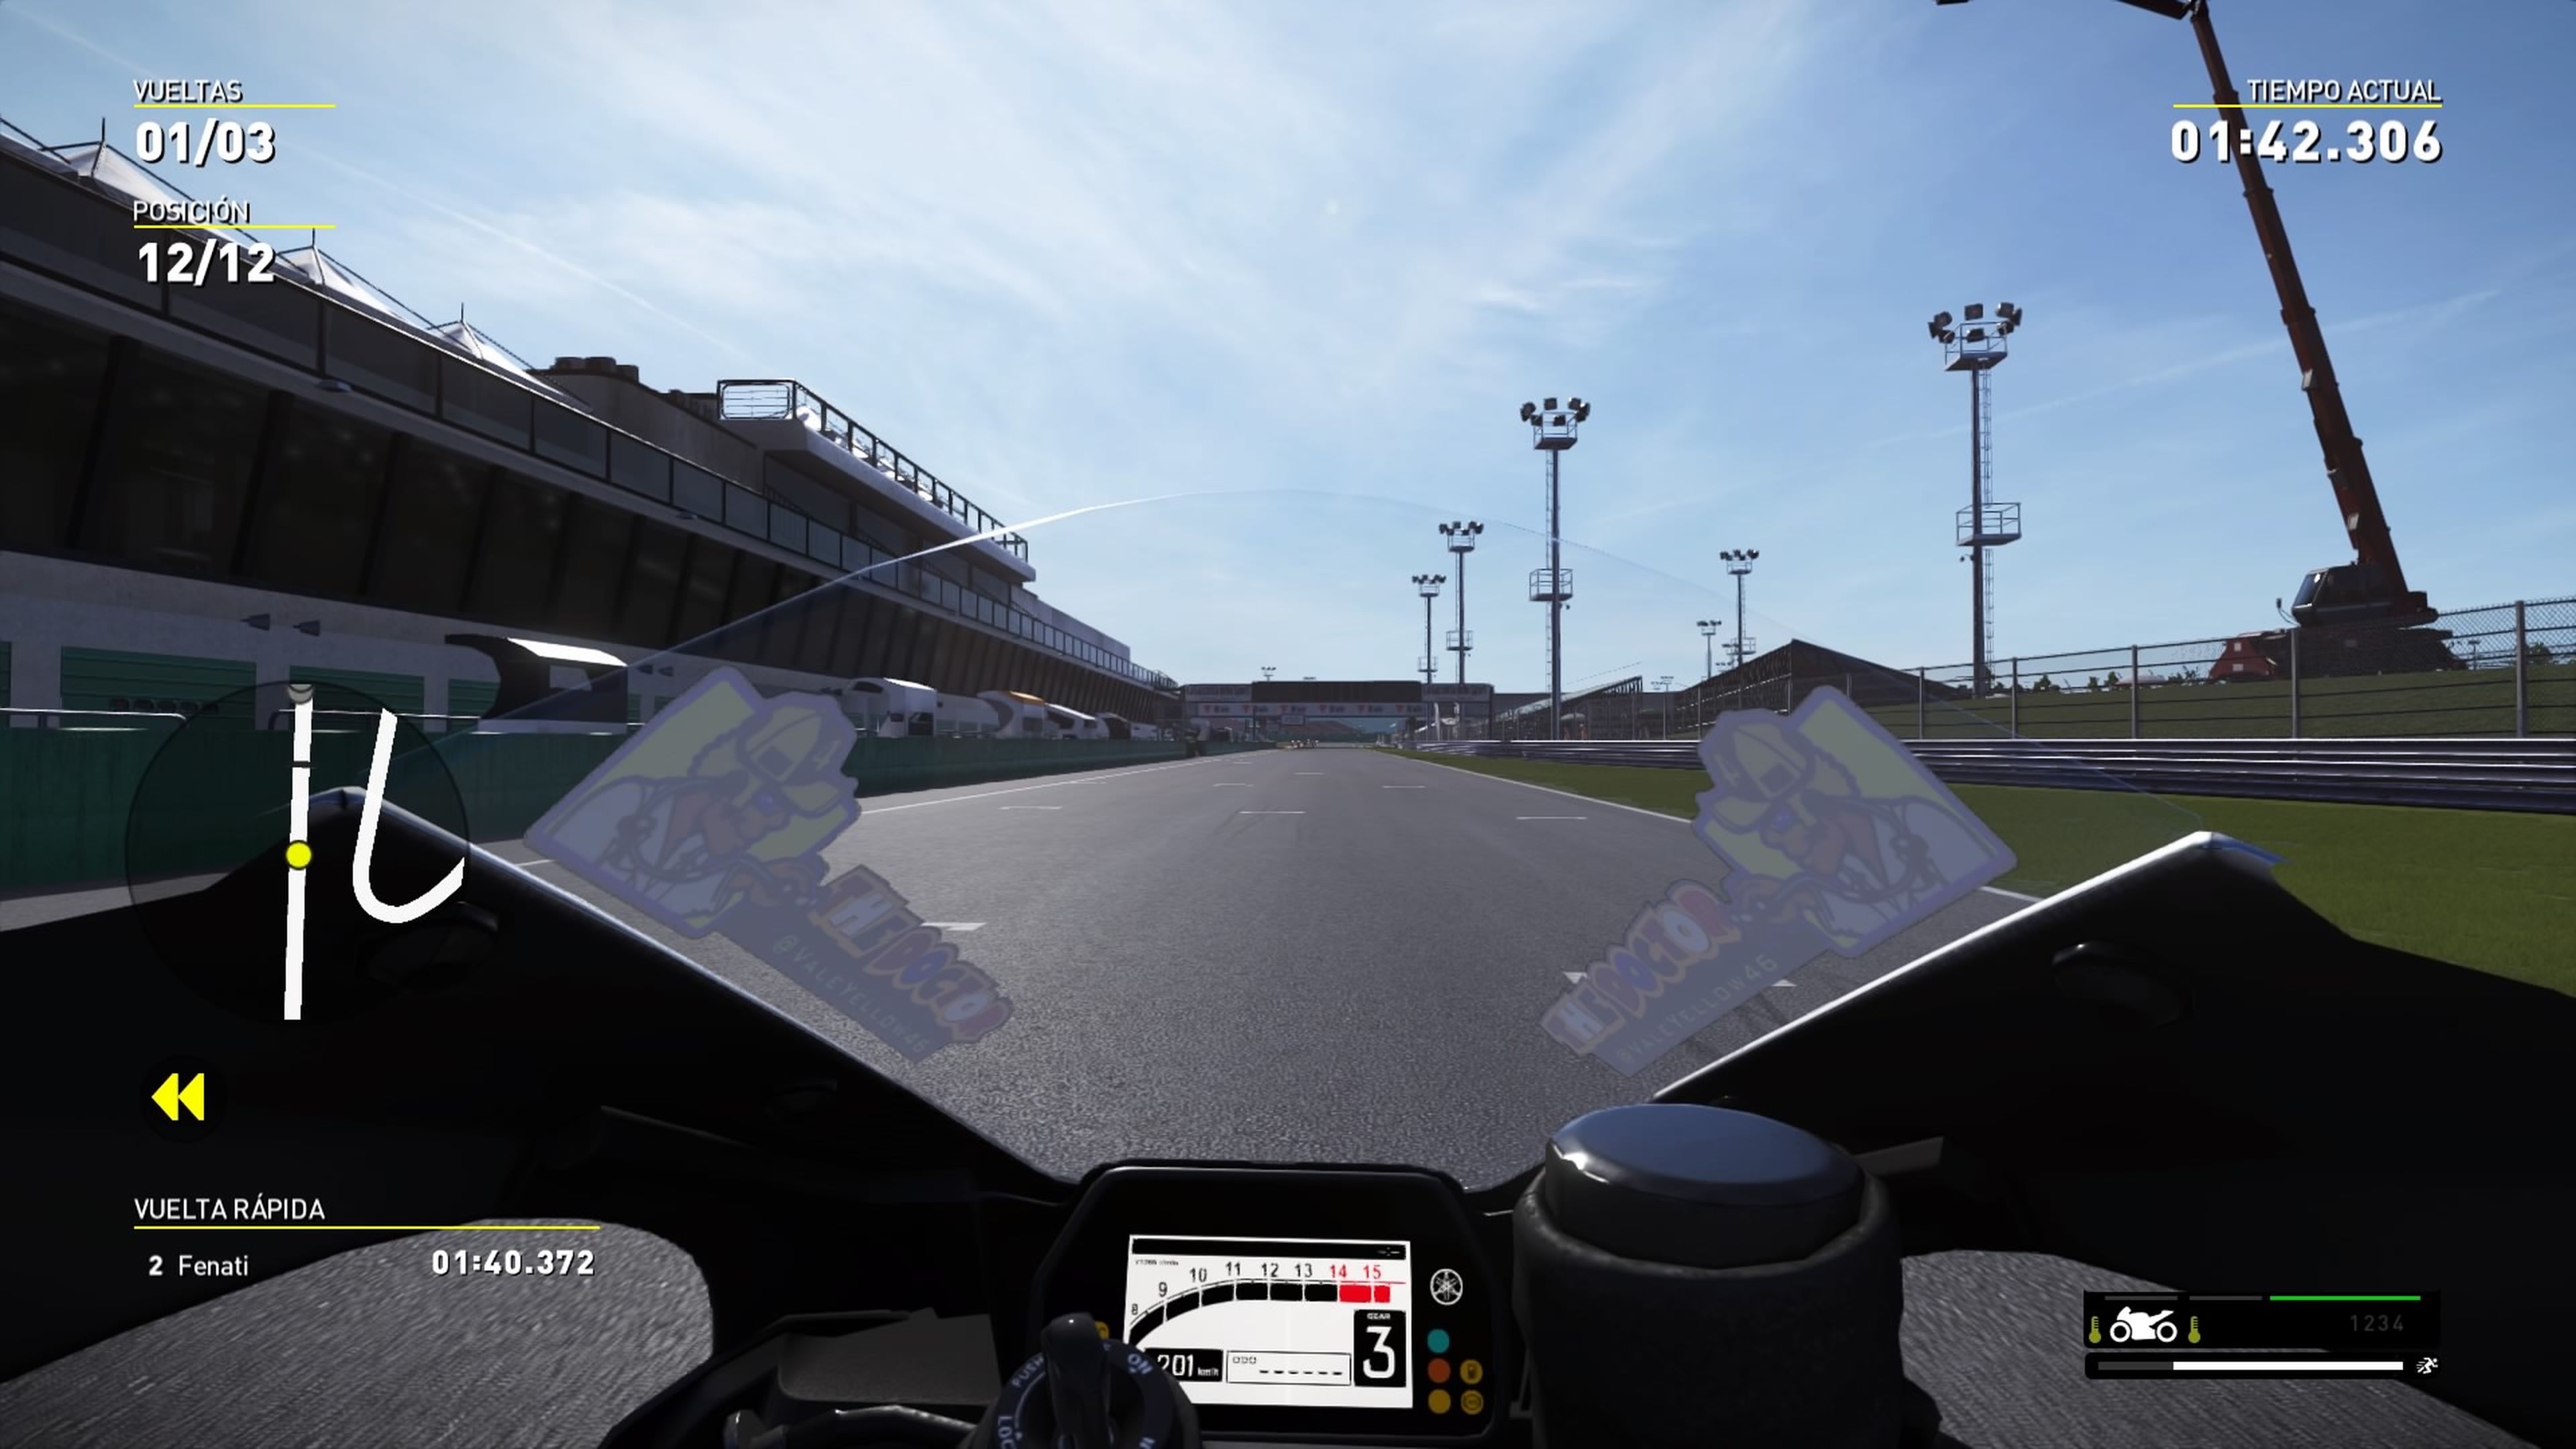 Valentino Rossi: The Game - Avance para PS4, Xbox One y PC